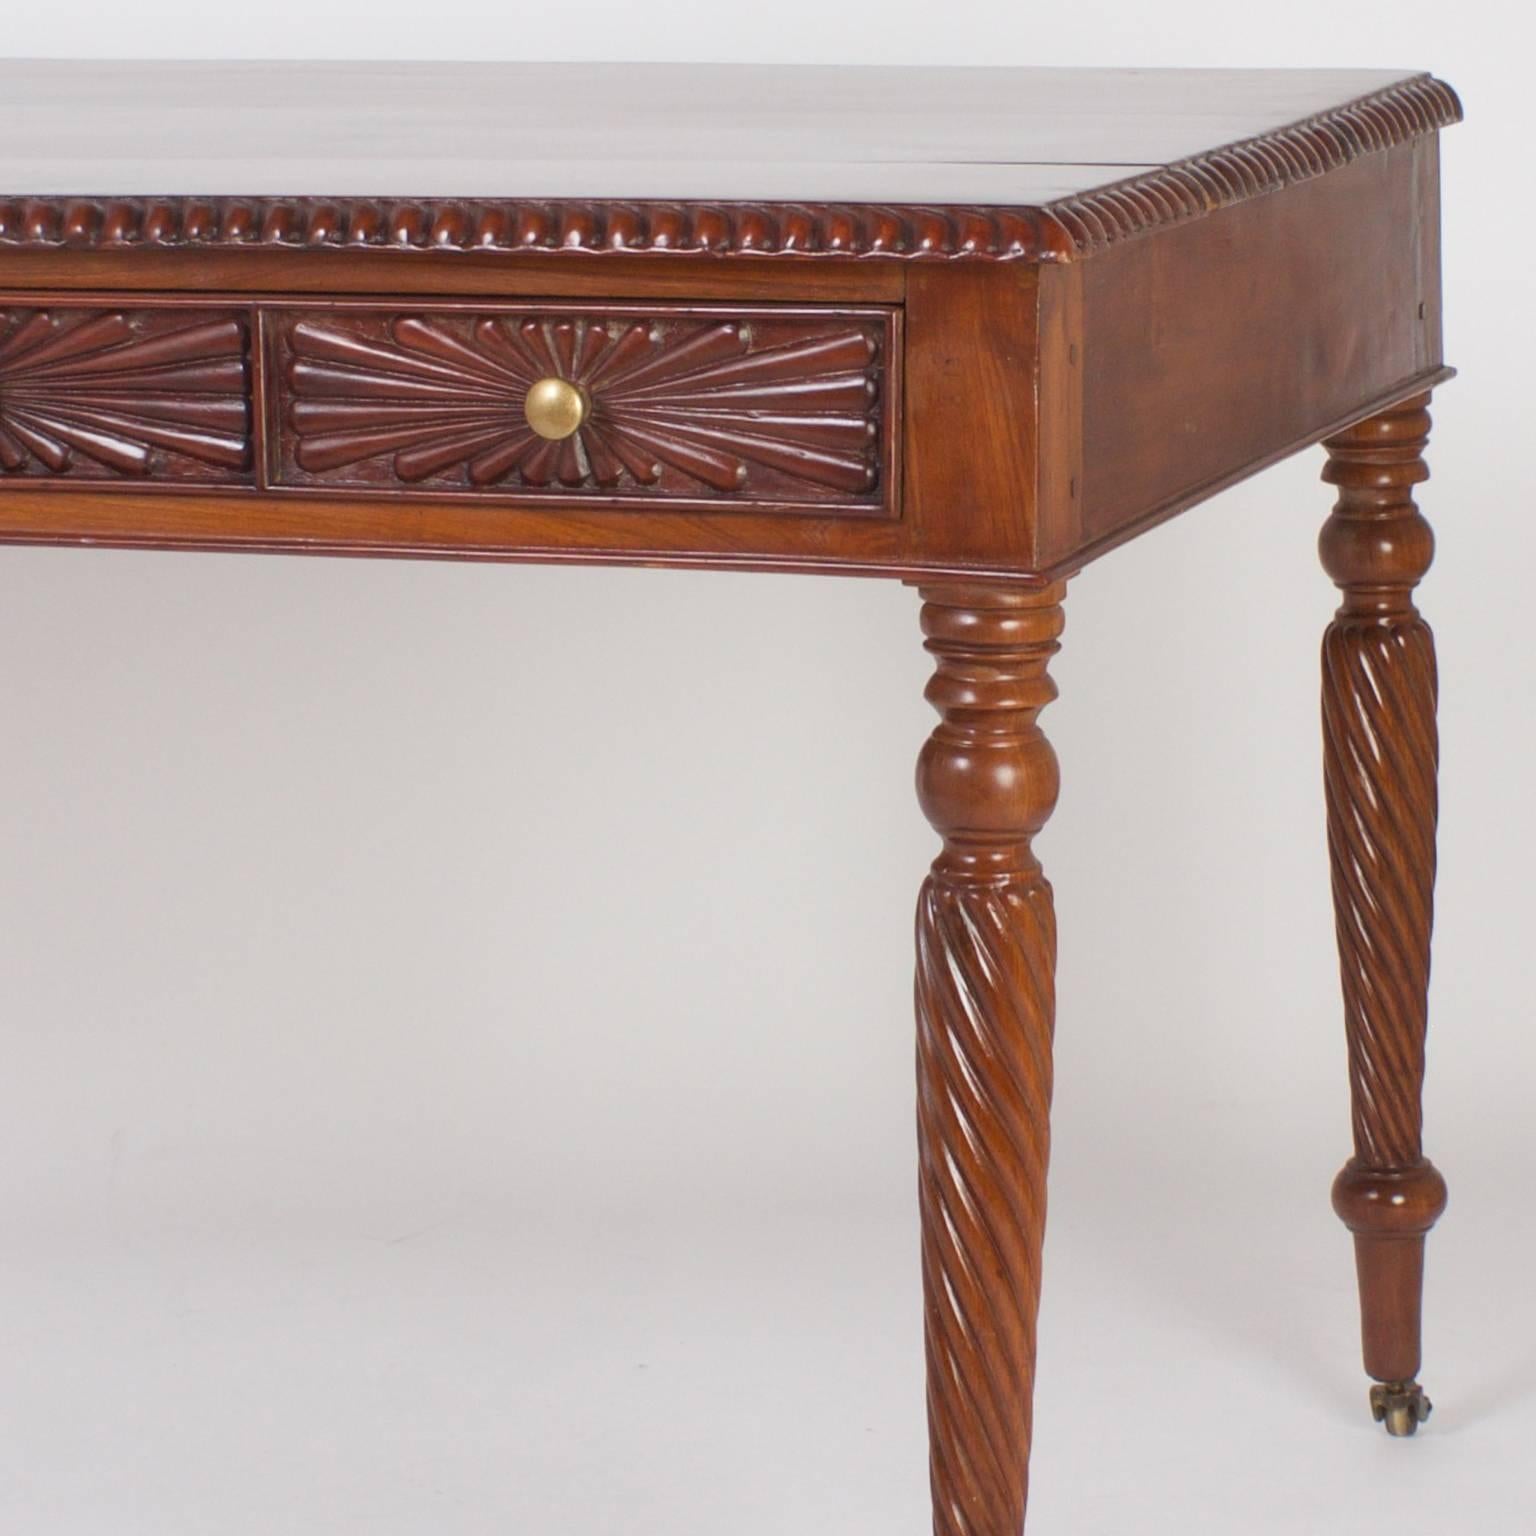 Anglo-Indian 19th Century British Colonial Writing Desk or Library Table